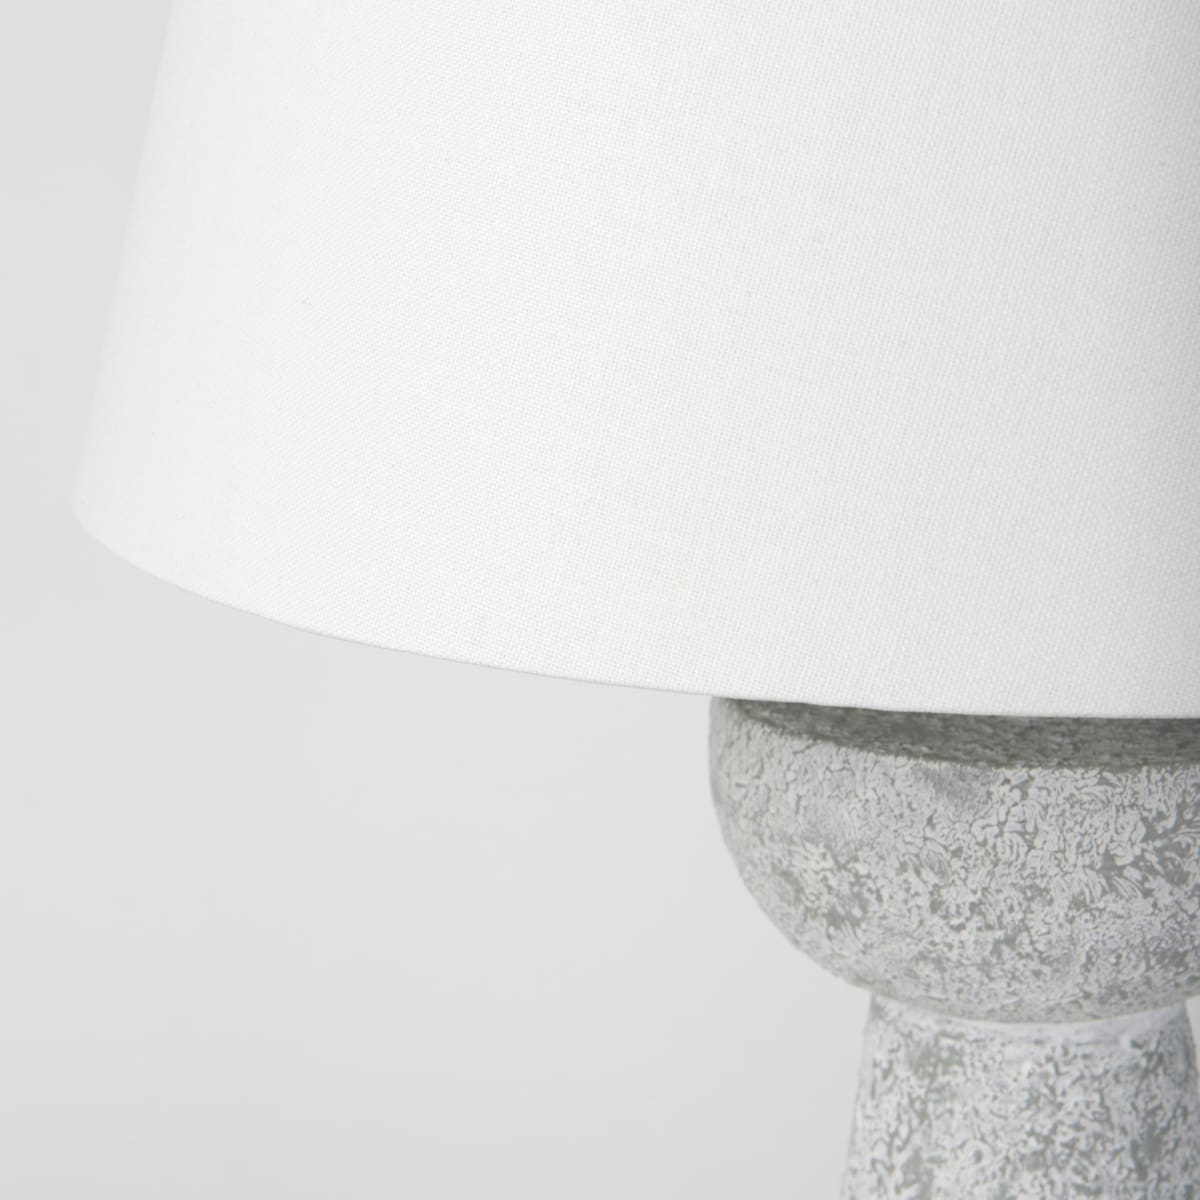 Julia Table Lamp Gray Cement | White Shade - table-lamps